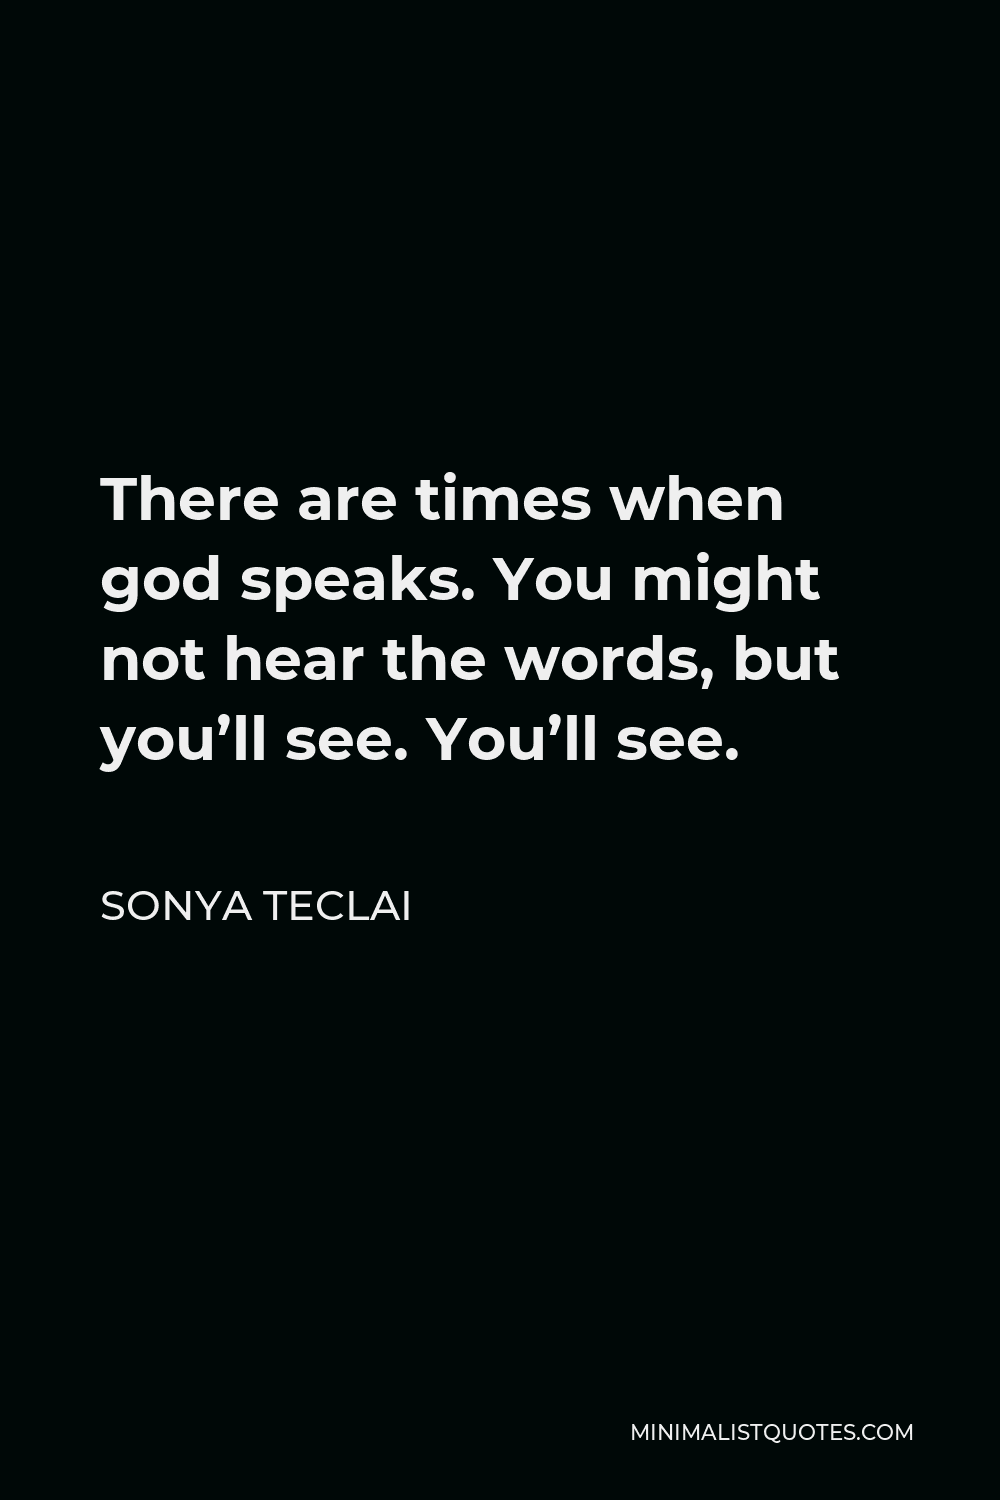 Sonya Teclai Quote - There are times when god speaks. You might not hear the words, but you’ll see. You’ll see.